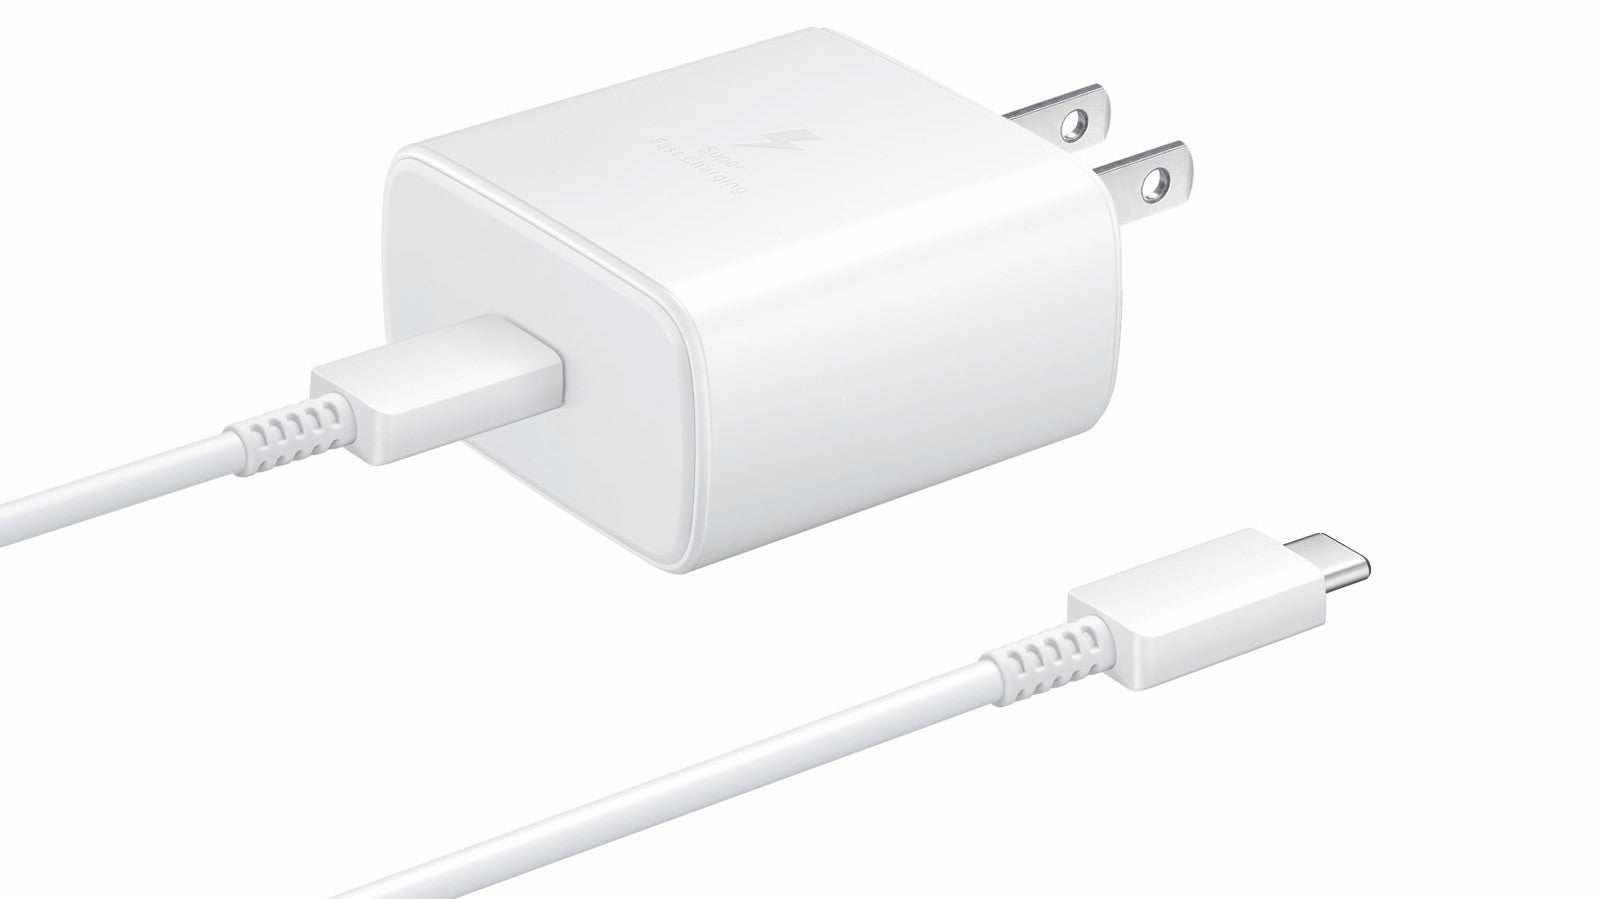 Wait To Buy A Galaxy Note 10+ Adaptor For Super-Fast 45W Charging